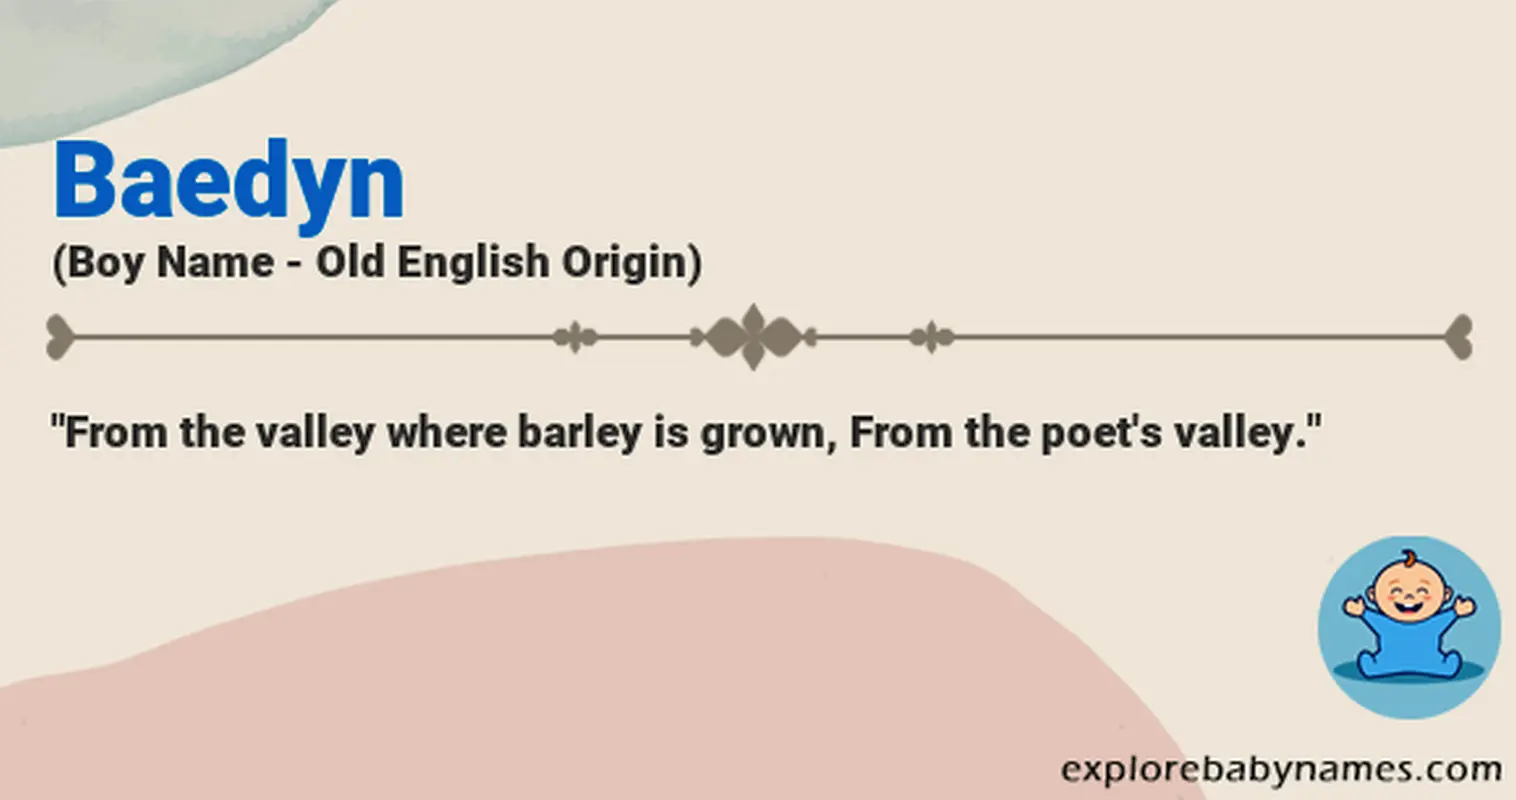 Meaning of Baedyn